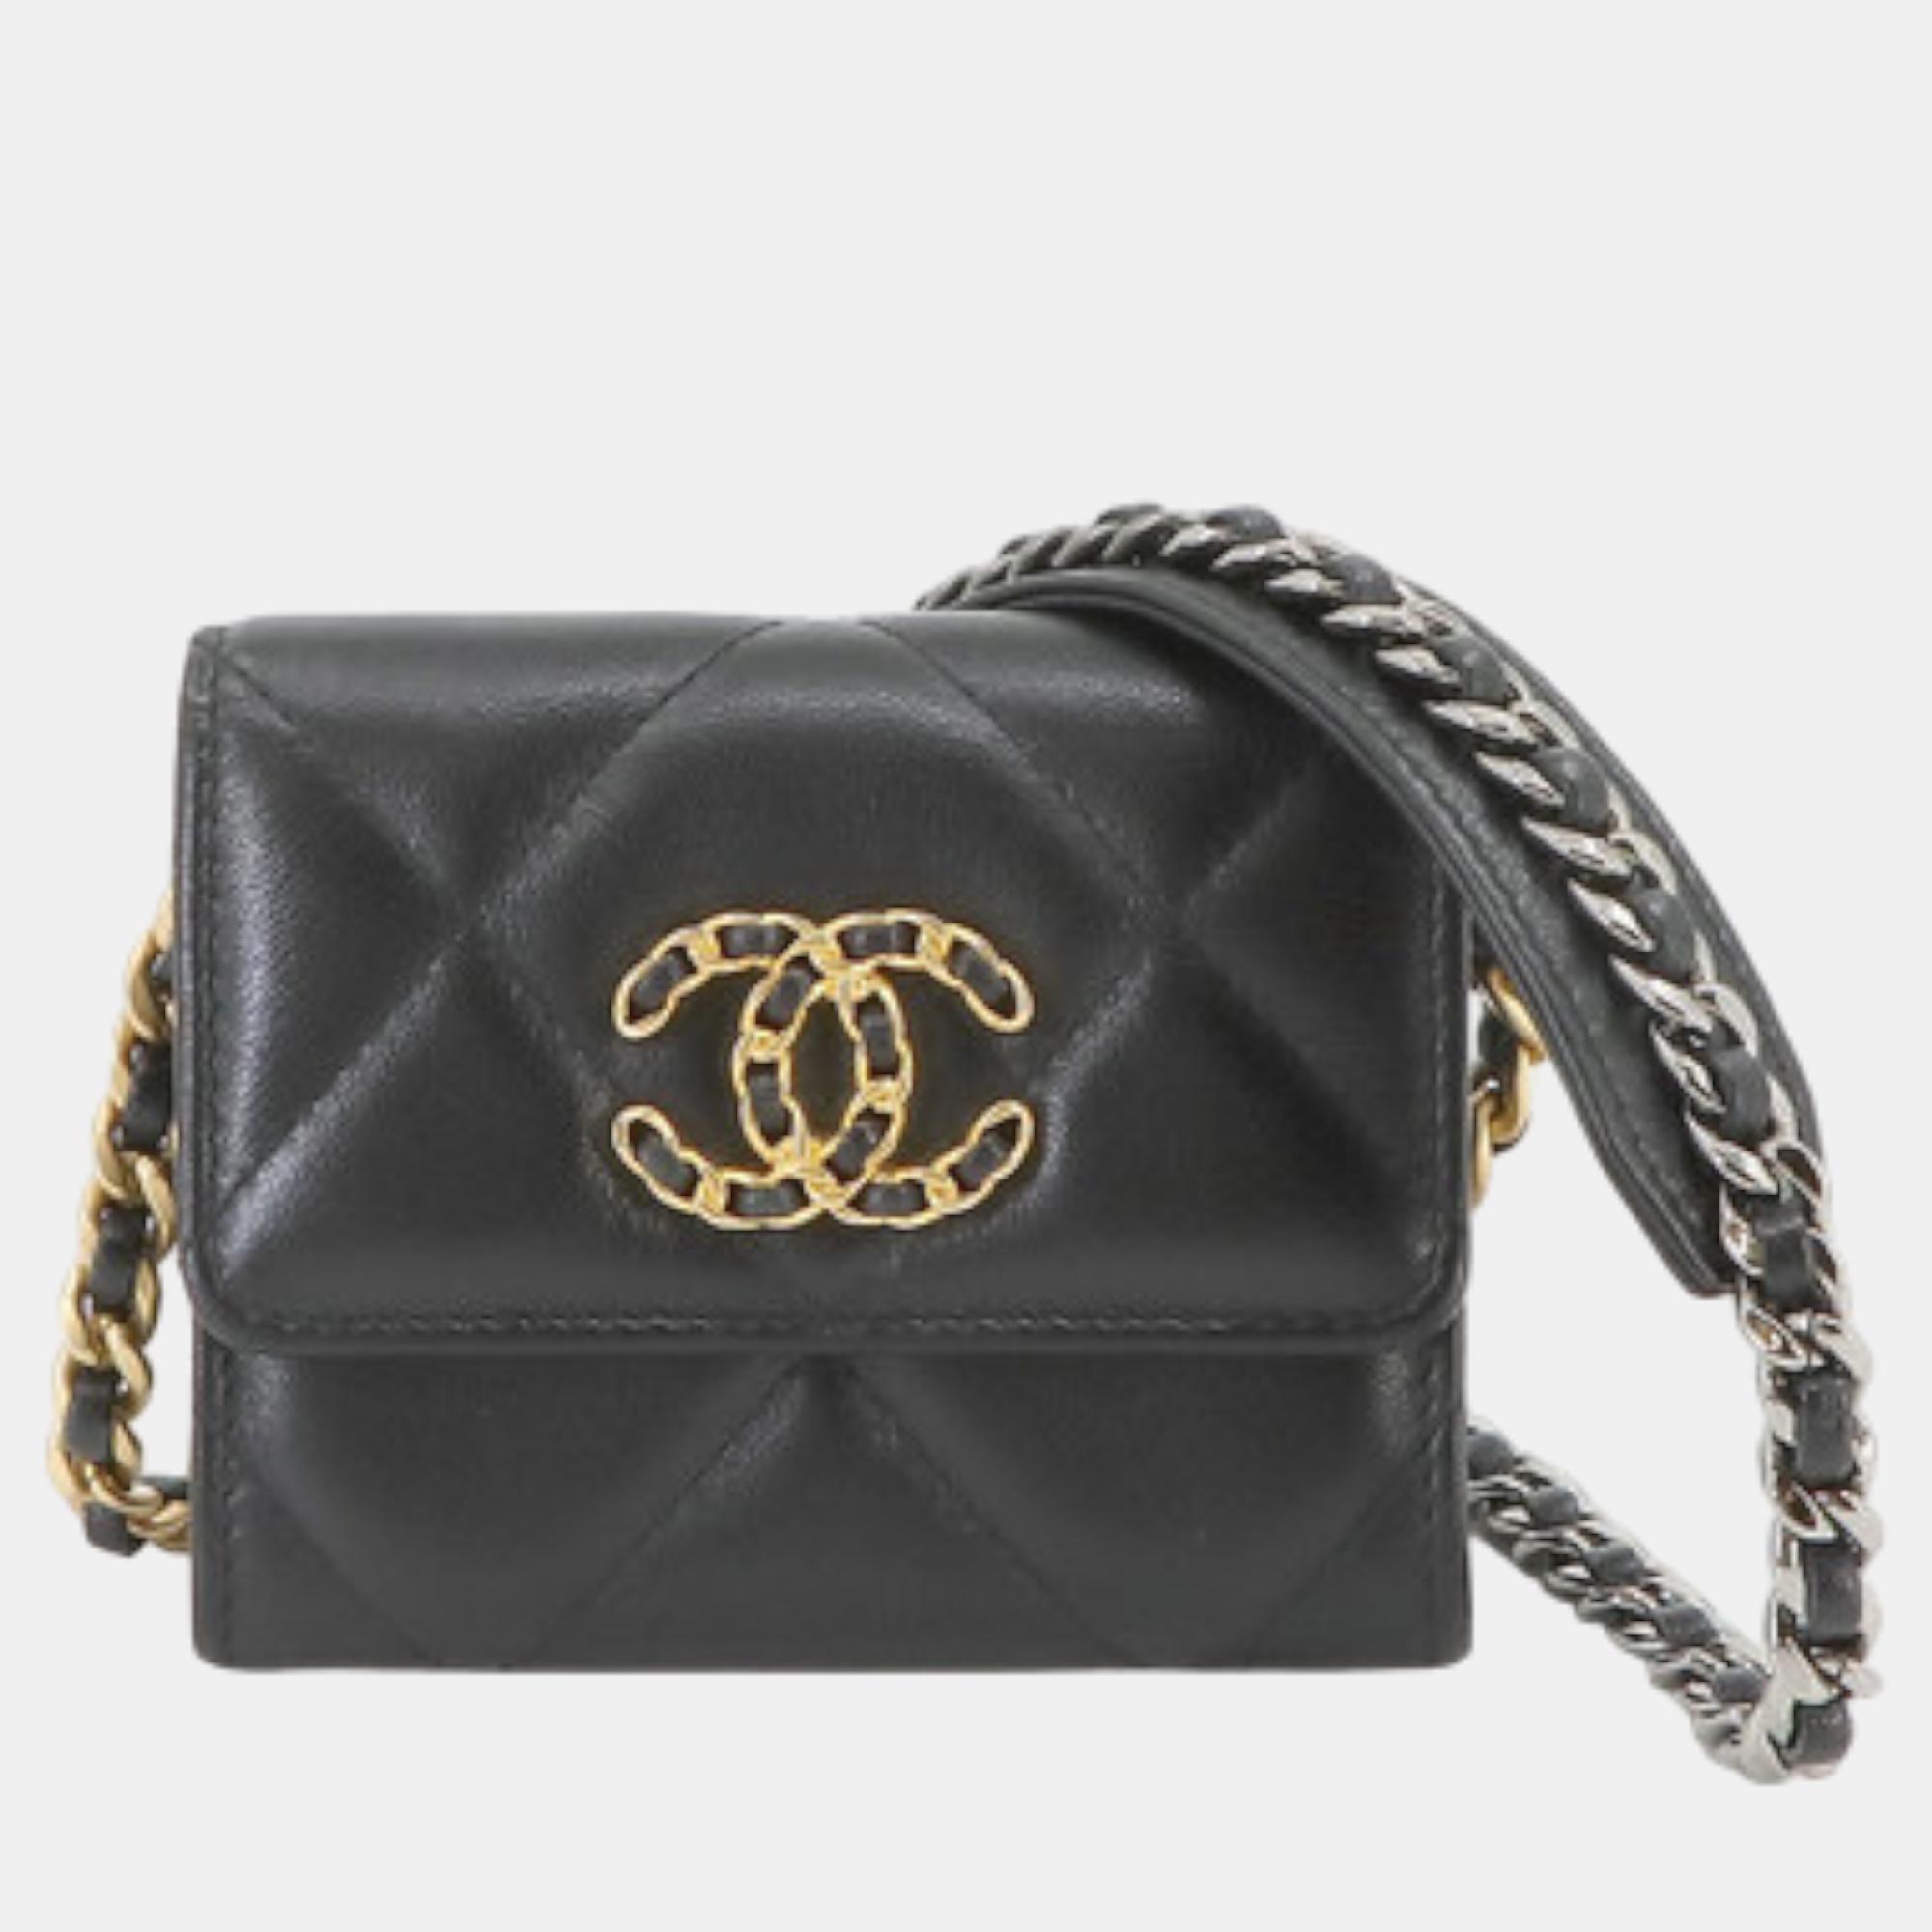 Chanel black quilted goatskin 19 flap coin purse with chain